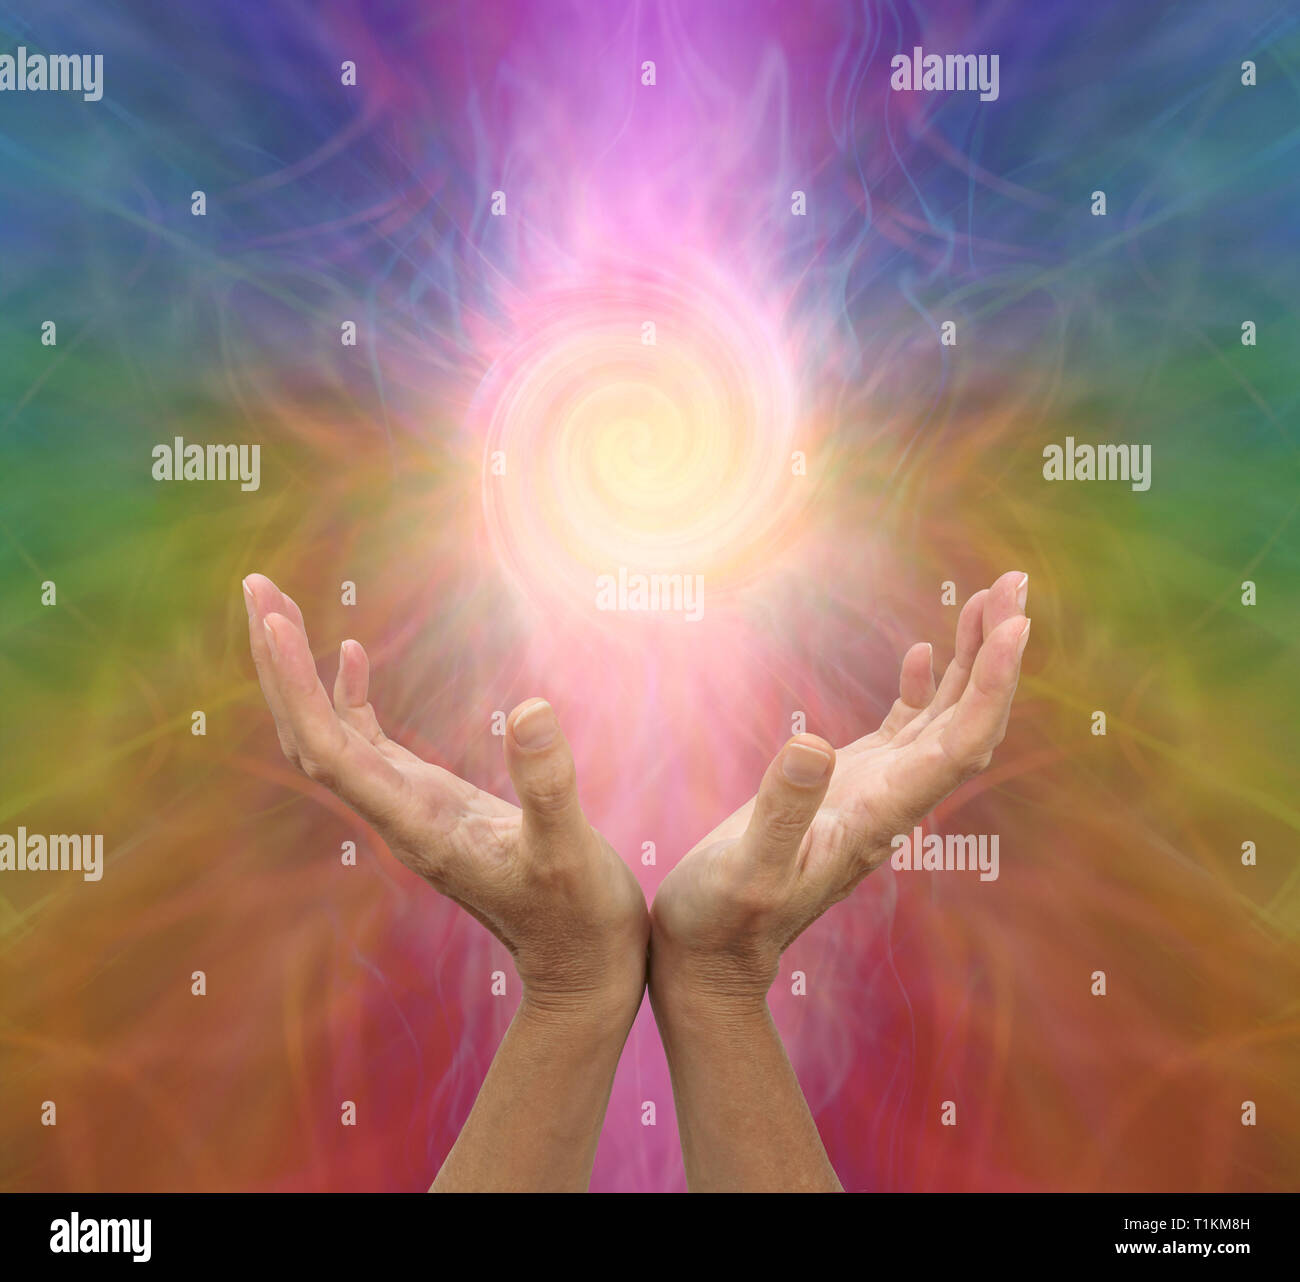 Channelling rainbow coloured vortex healing energy - female hands held open and palms upwards with a spiralling energy formation above Stock Photo